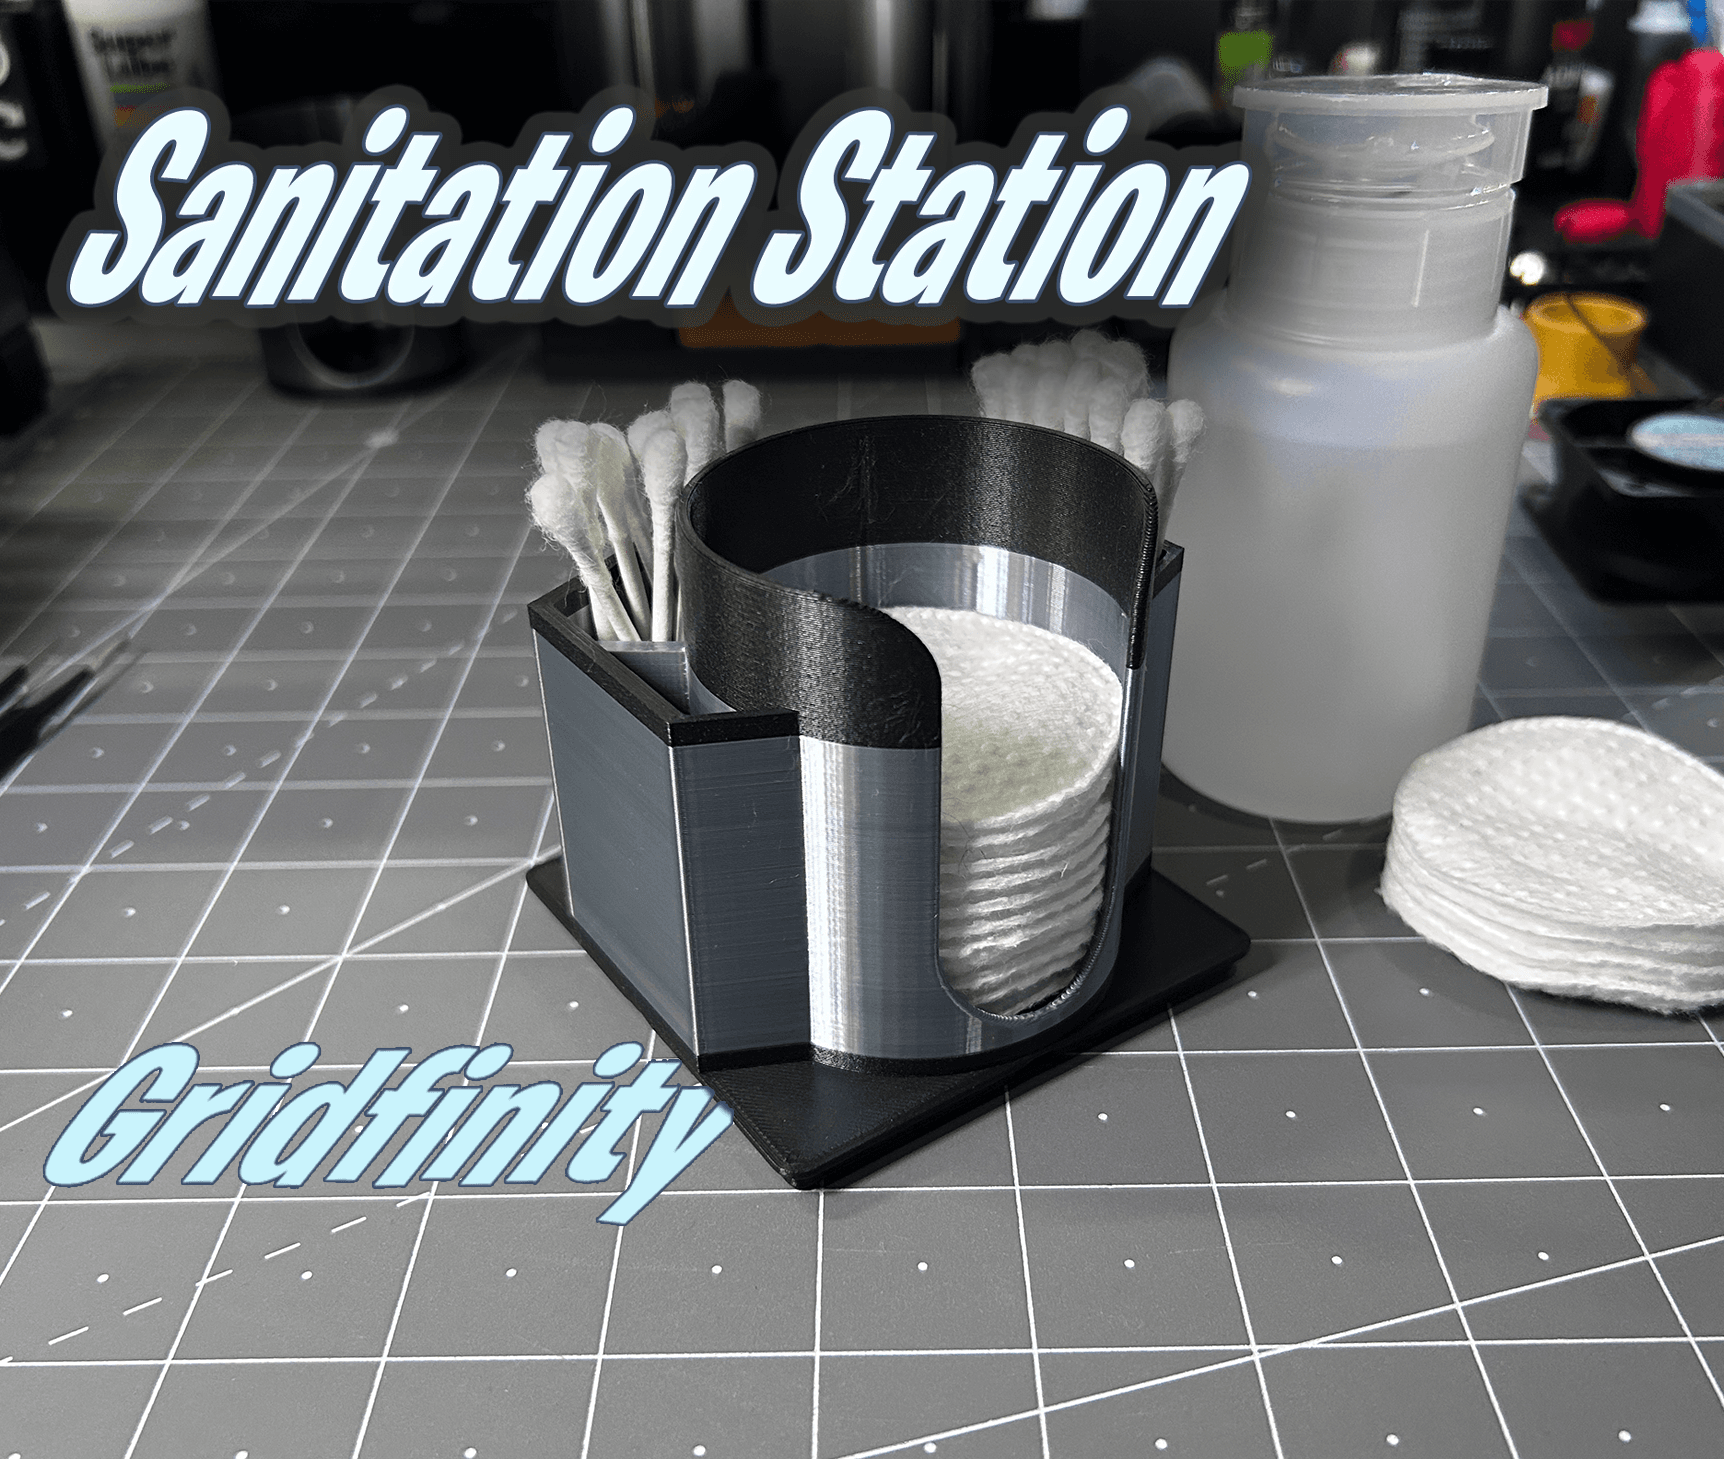 Gridfinity Cotton Pad and Q-Tip holder - Sanitation Station 2x2 3d model